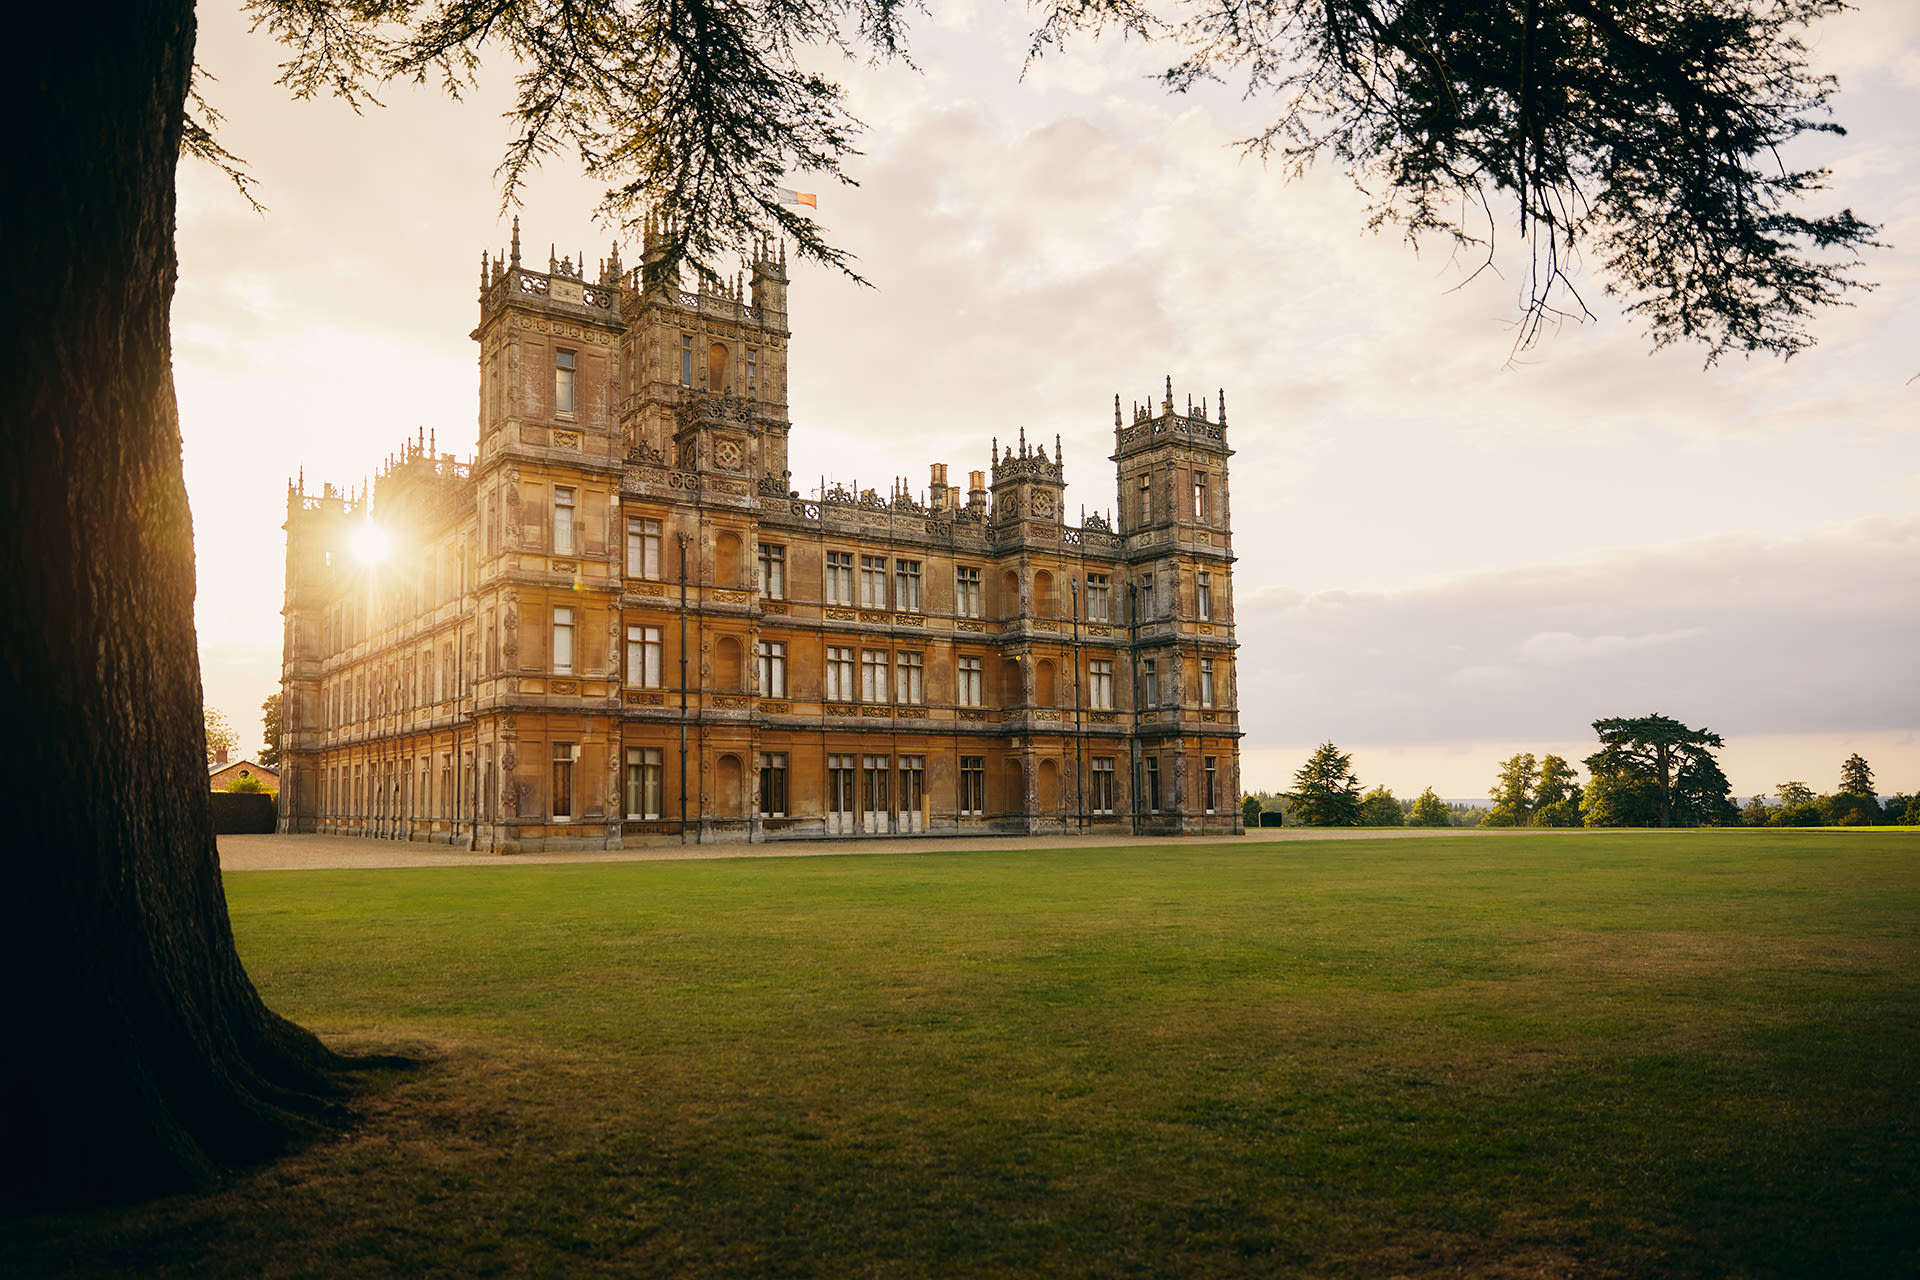 Downton Abbey fans can now spend a night at the Highclere Castle